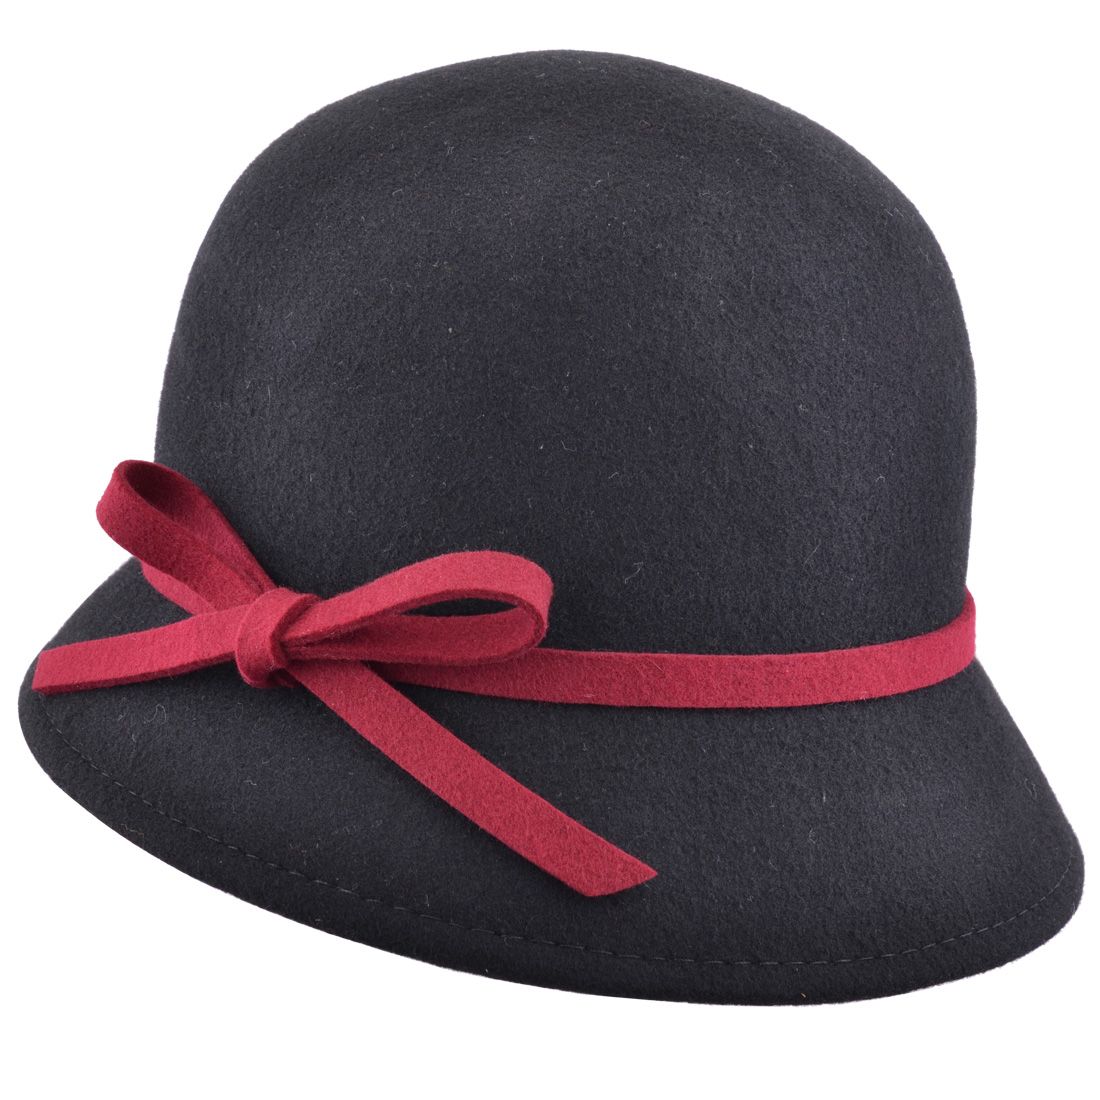 Wool Felt Cloche Hat With Bow